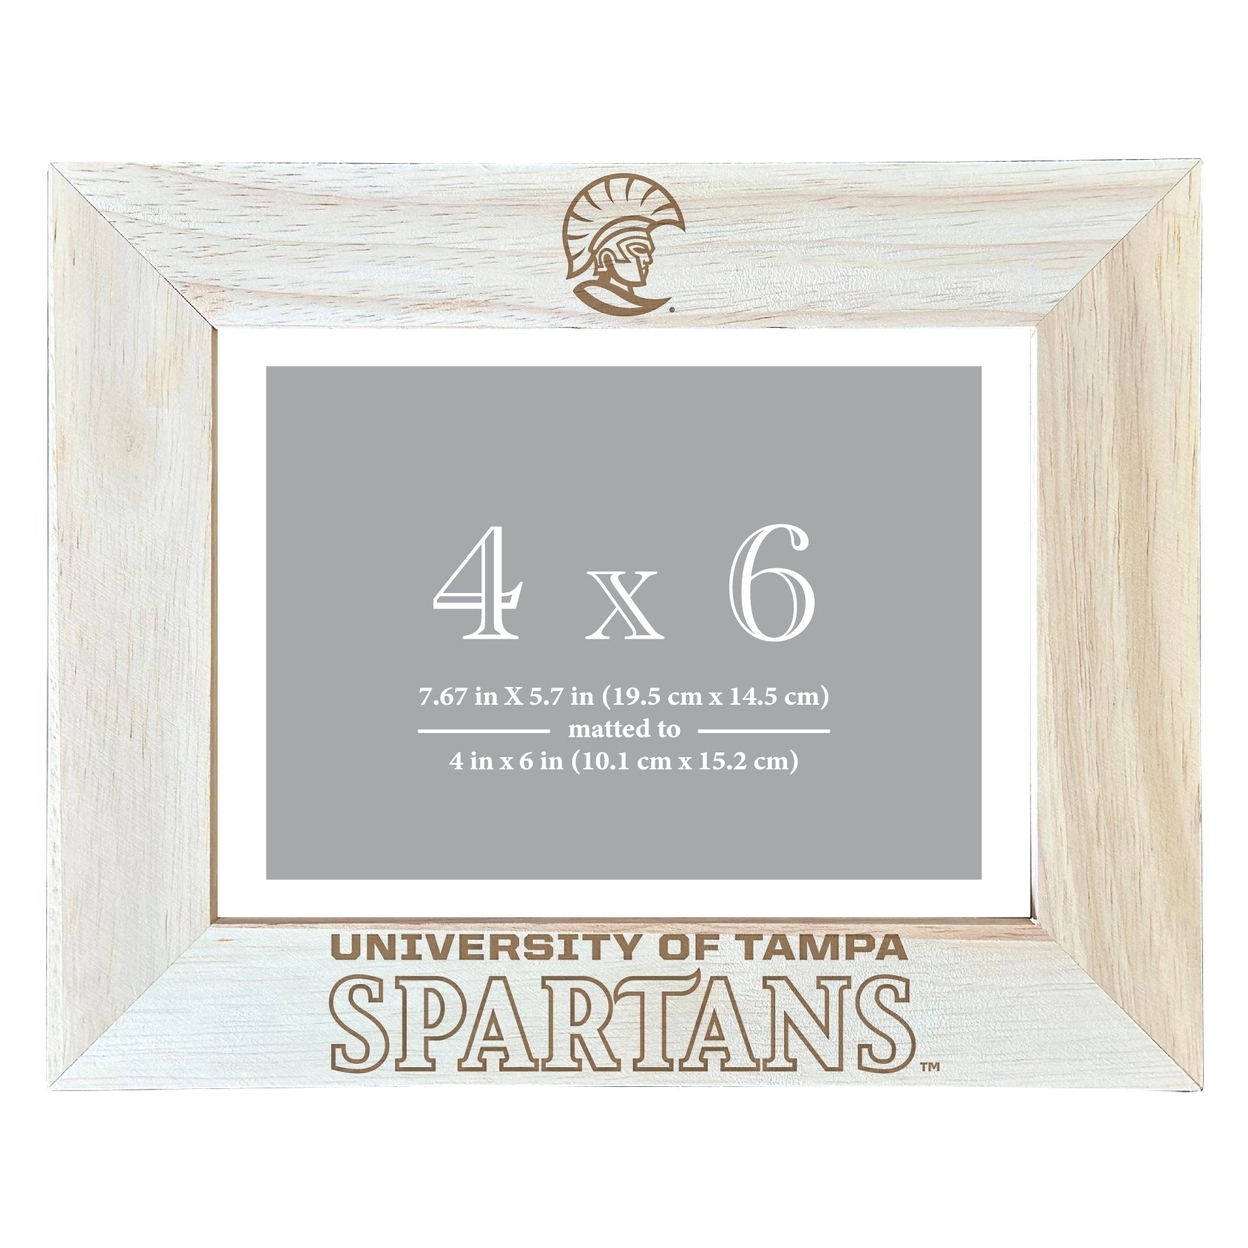 University Of Tampa Spartans Wooden Photo Frame Matted To 4 X 6 Inch - Etched